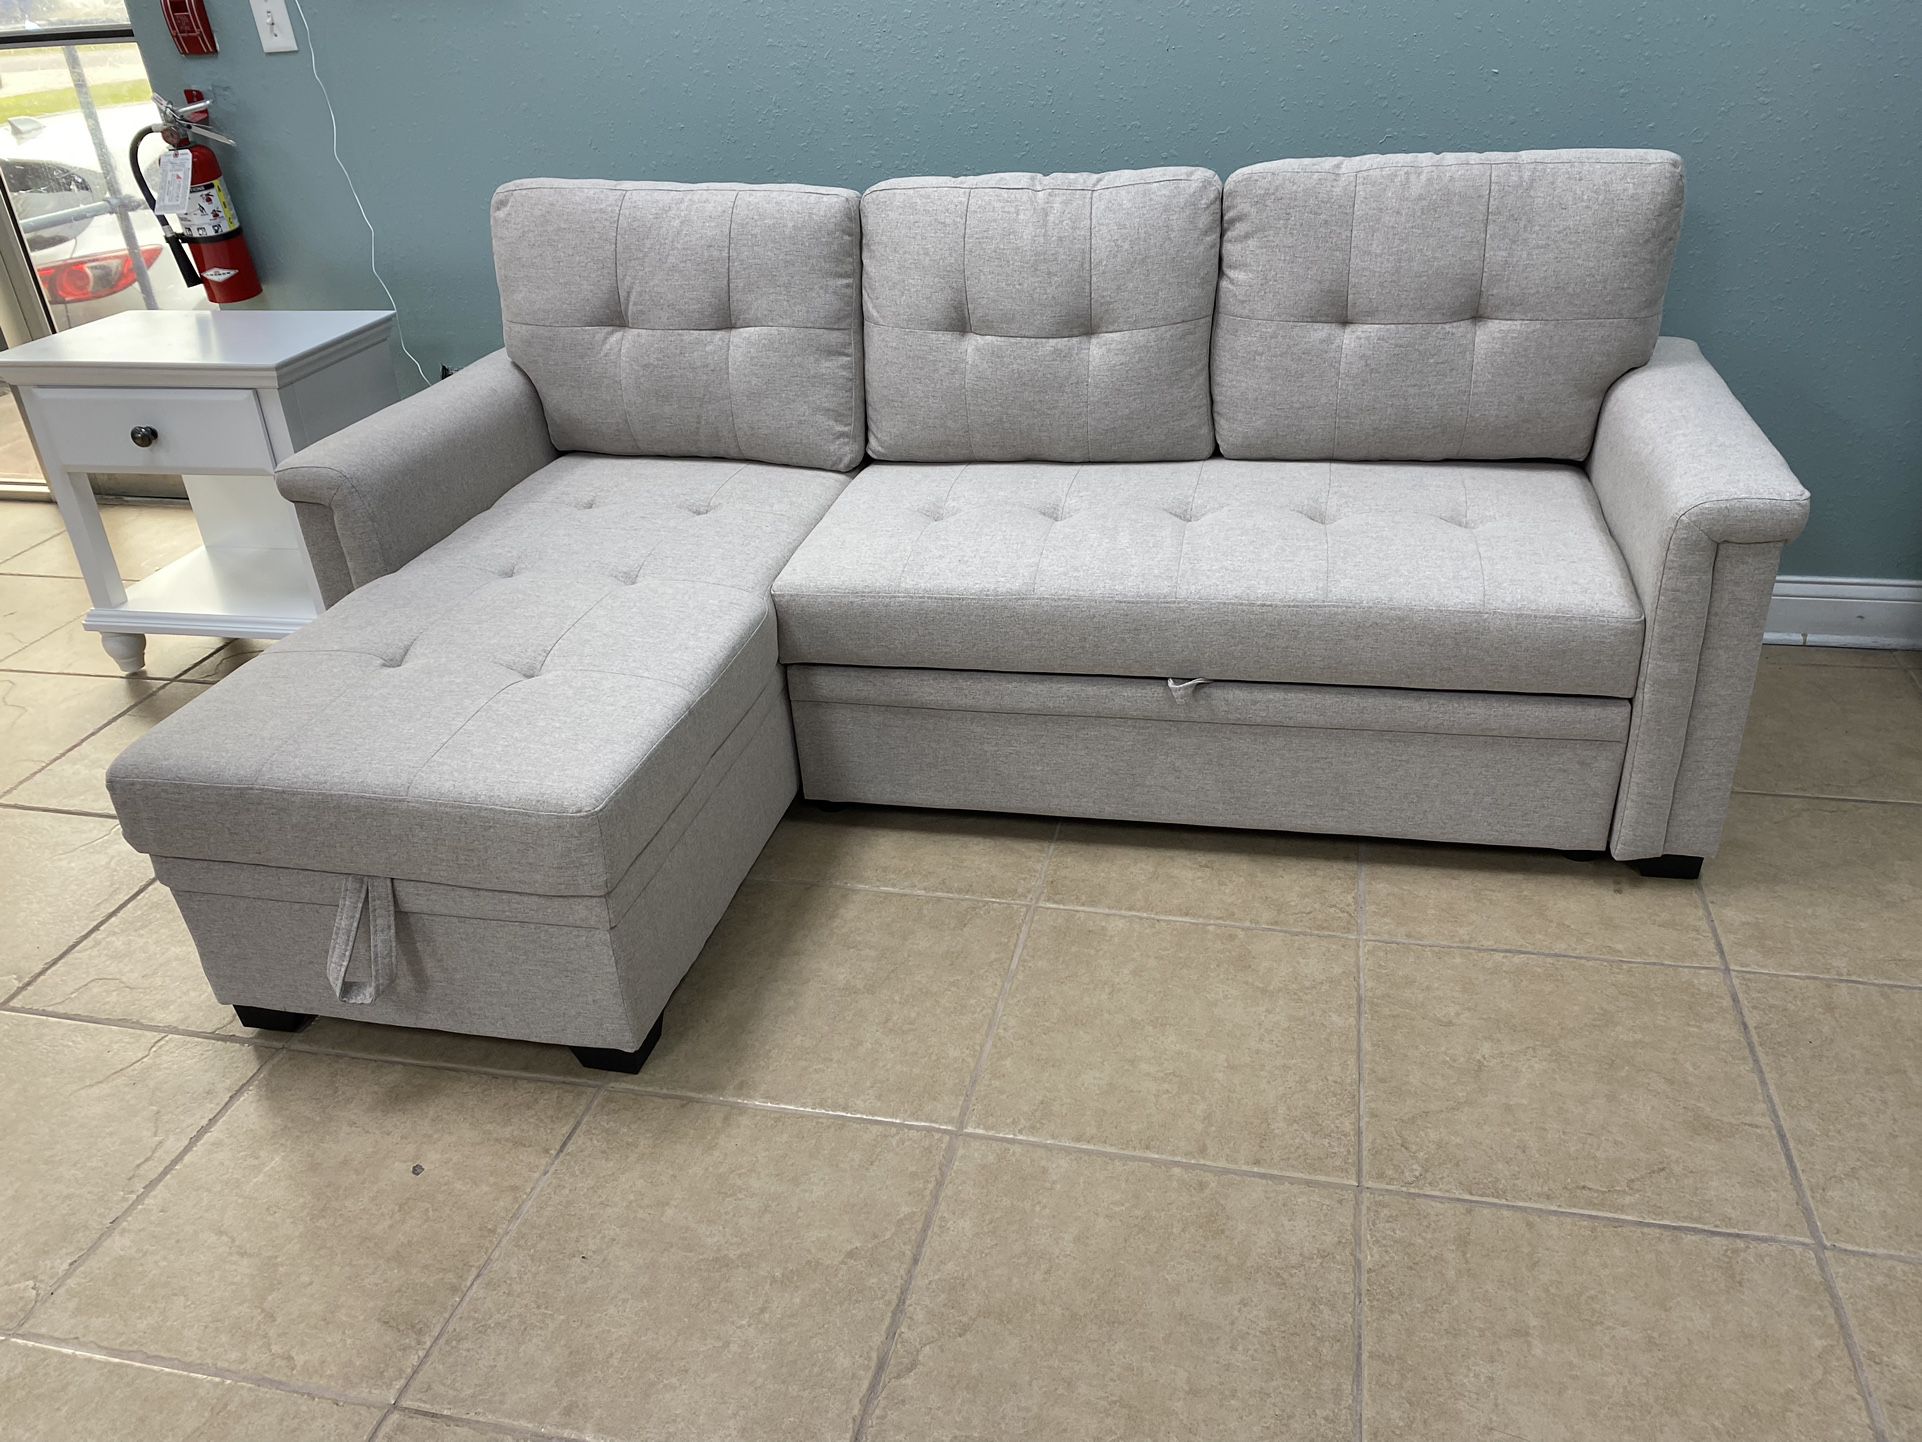 Two Piece Reversible Sleeper Sectional With Storage And Usb Ports $399